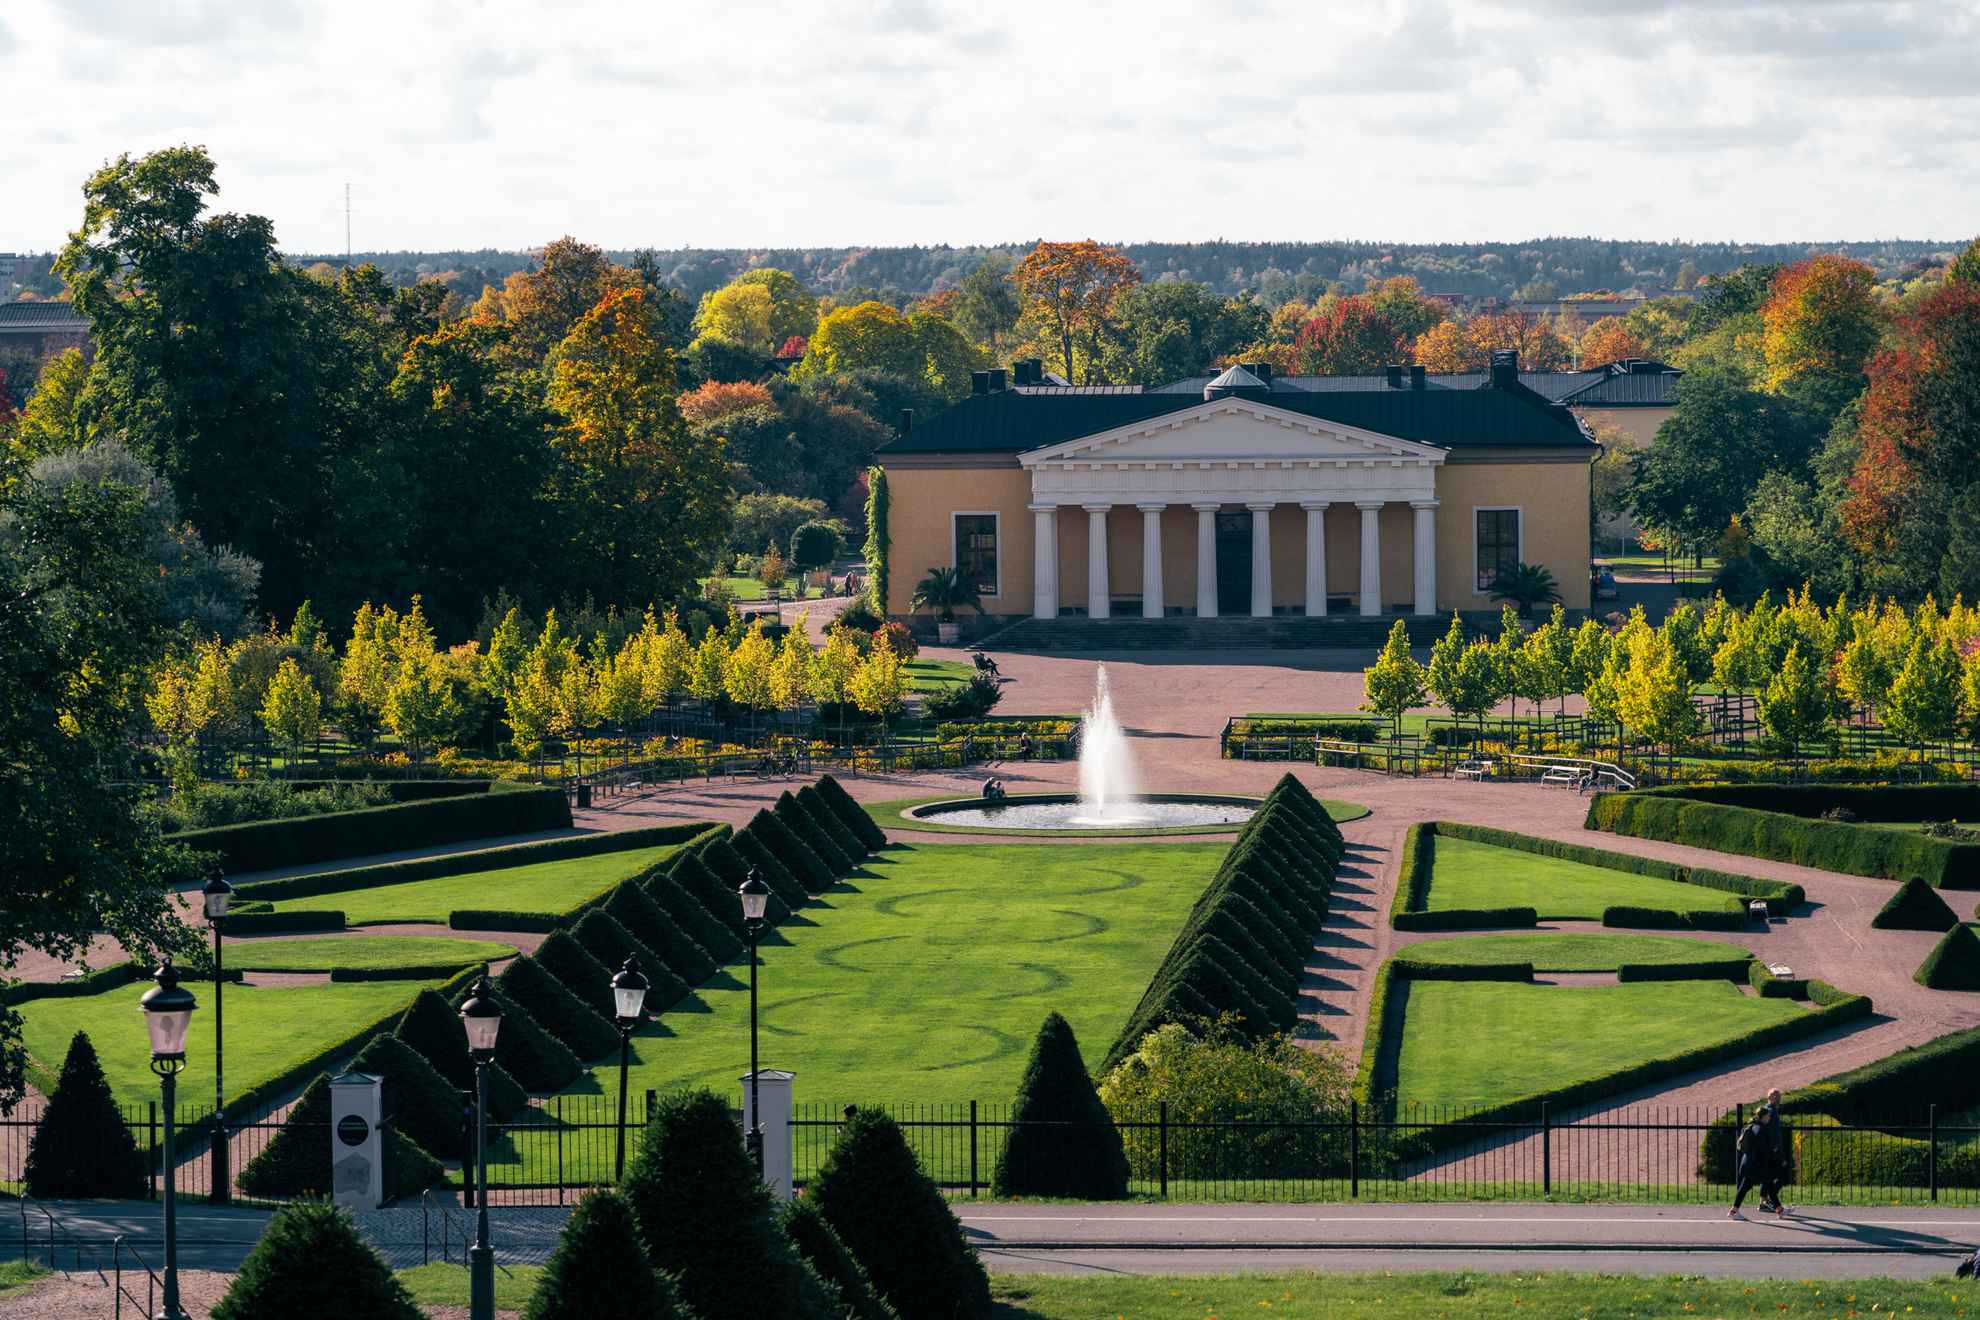 Botanical Garden in Uppsala. Autumn with coloured leafs mixed with green. View over the baroque garden. The building Linneanum in the background.